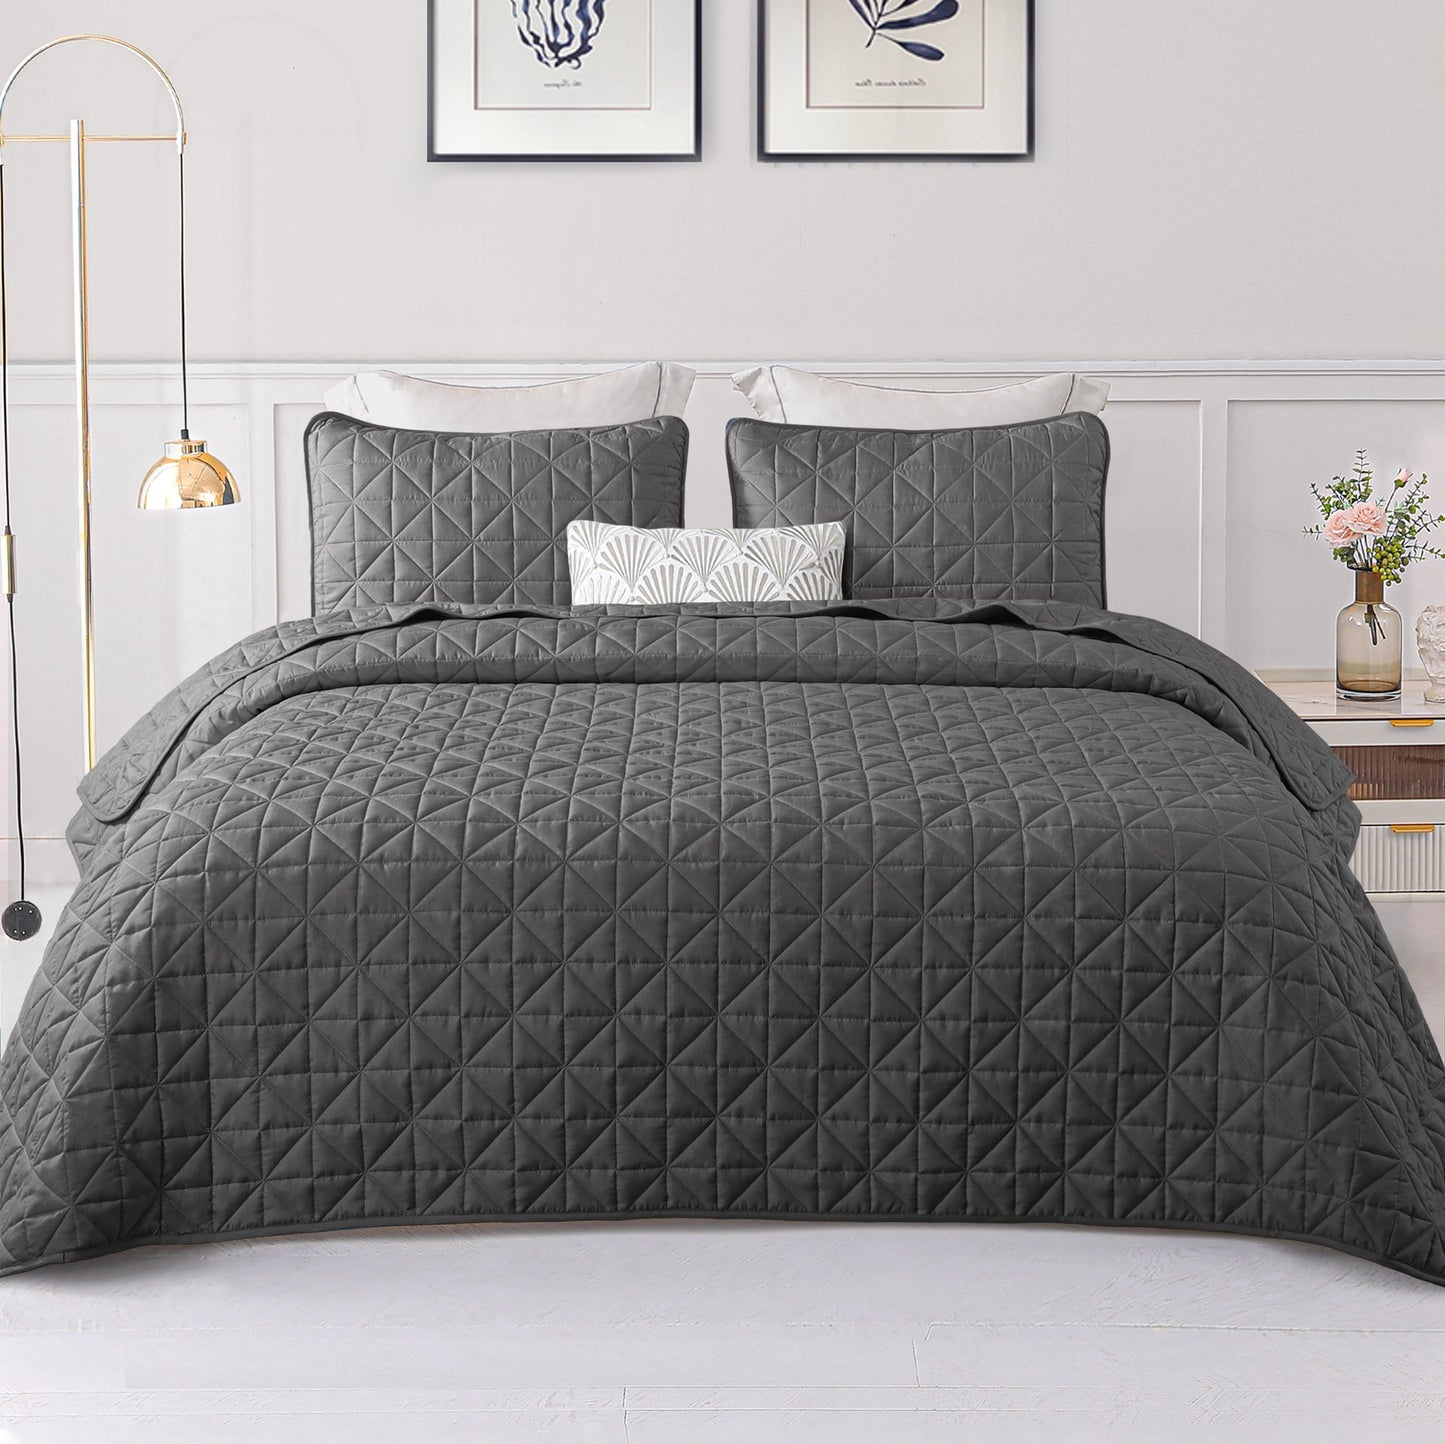 Exclusivo Mezcla Twin Quilt Bedding Set for All Seasons, Lightweight Soft Grey Quilts Twin Size Bedspreads Coverlets Bed Cover with Geometric Stitched Pattern, (1 Quilt, 1 Pillow Sham)